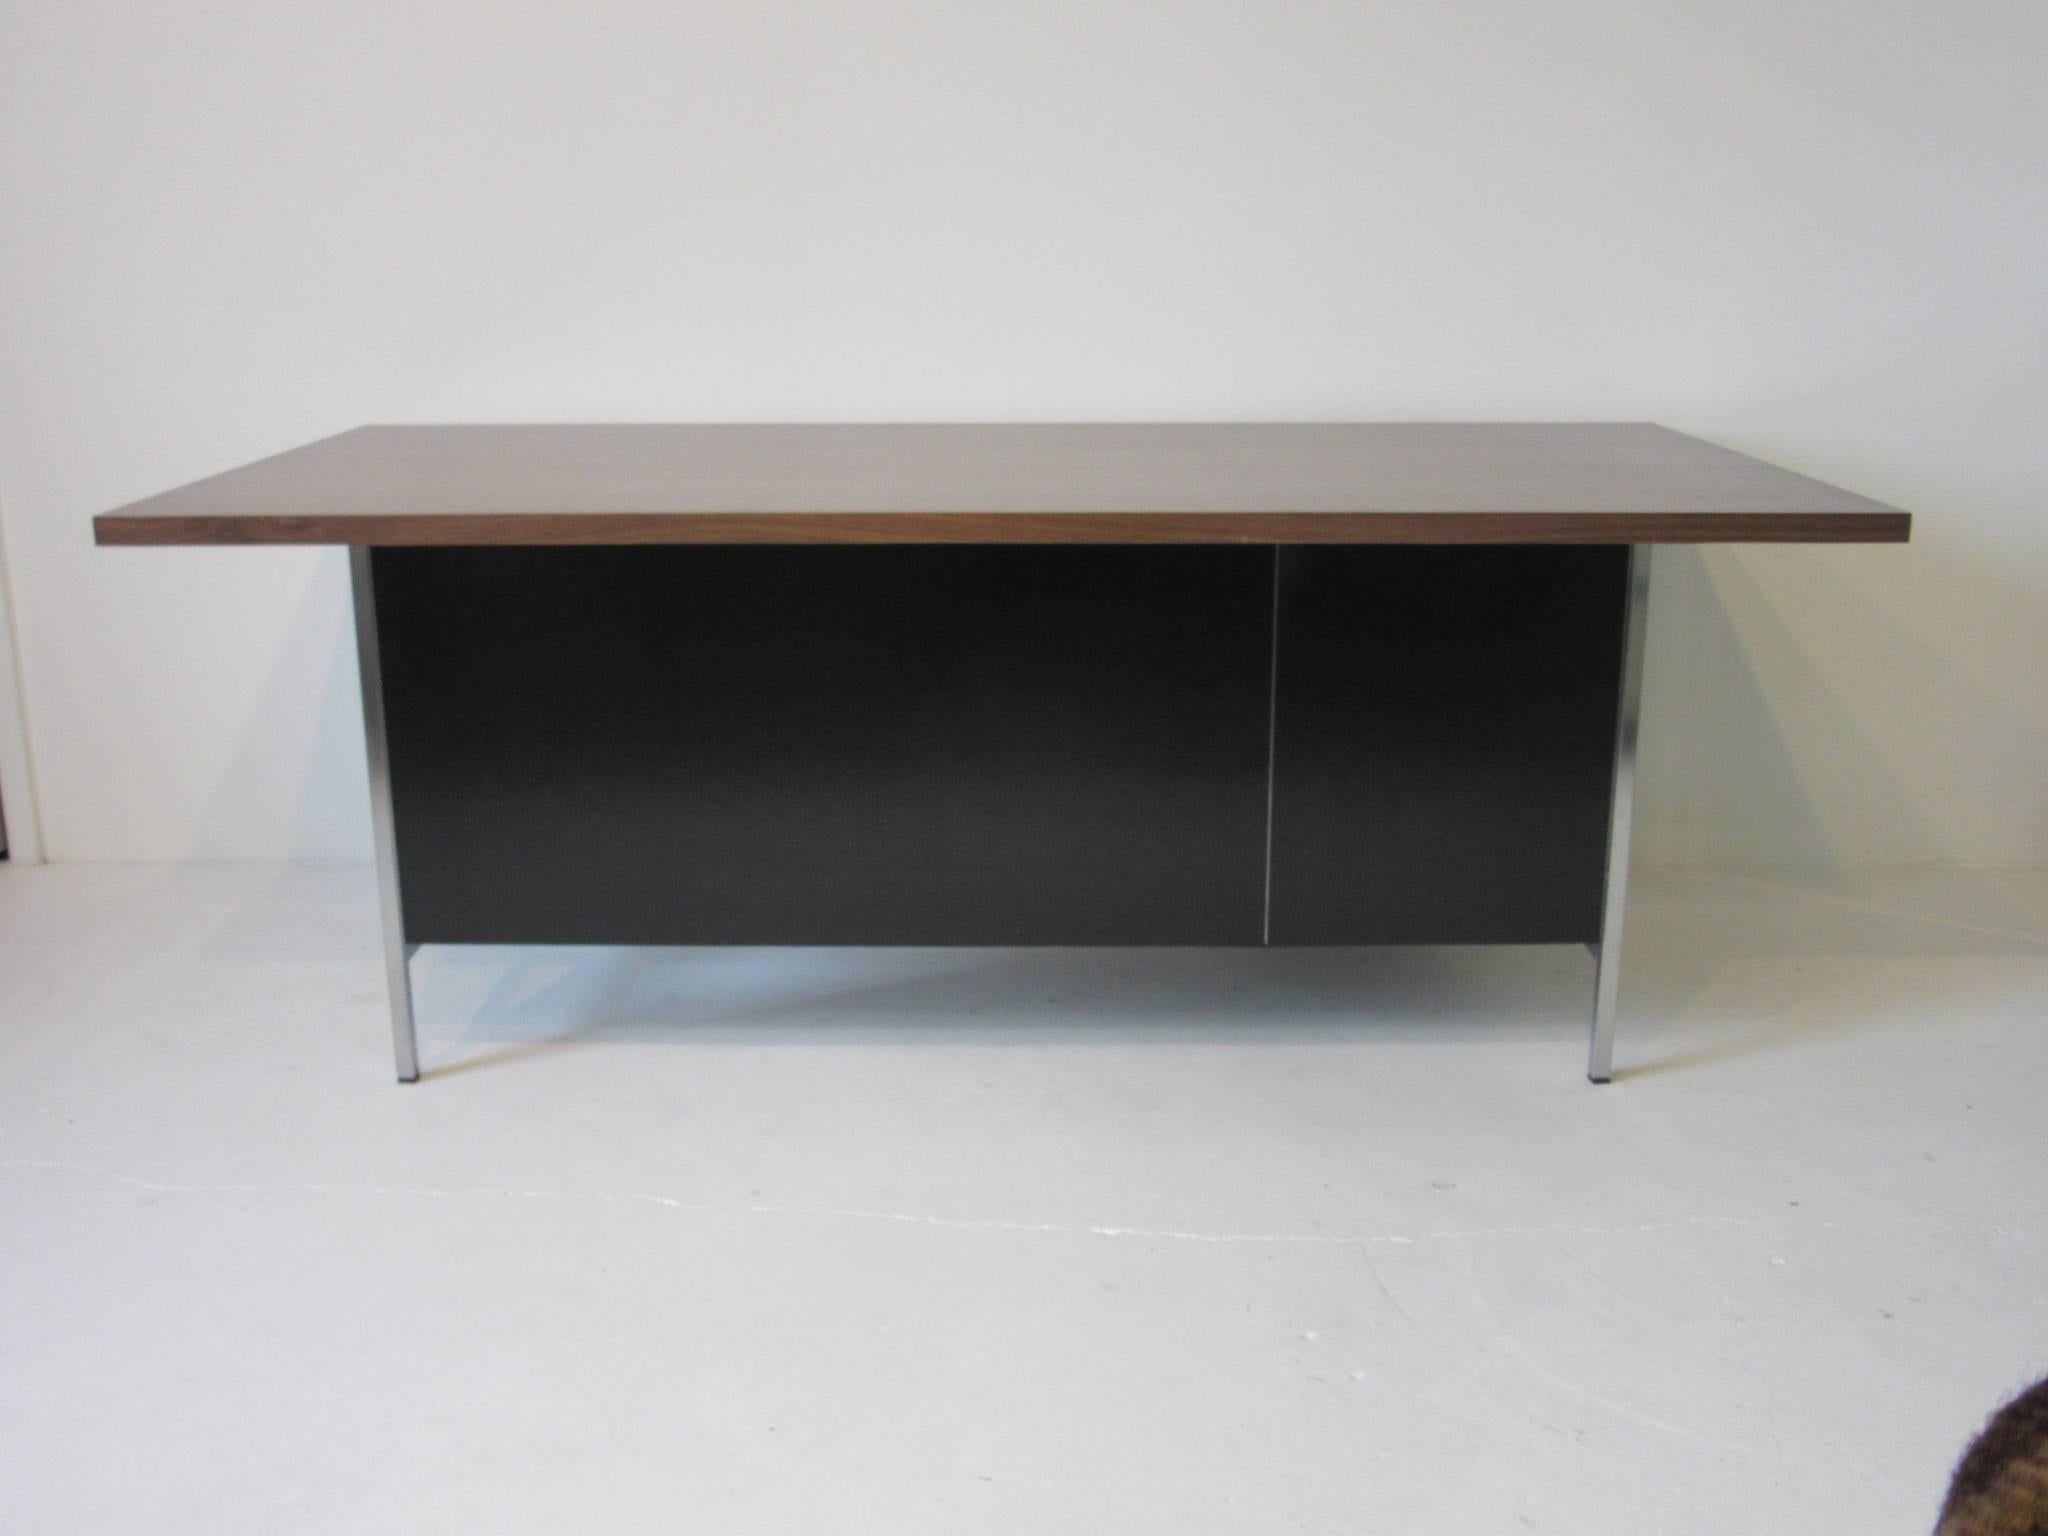 A well designed desk by Florence Knoll with satin black panels and drawer fronts a medium toned walnut desk top all sitting on a brushed stainless steel frame. There are two drawers to the left the lower is a file and the upper one for storage,